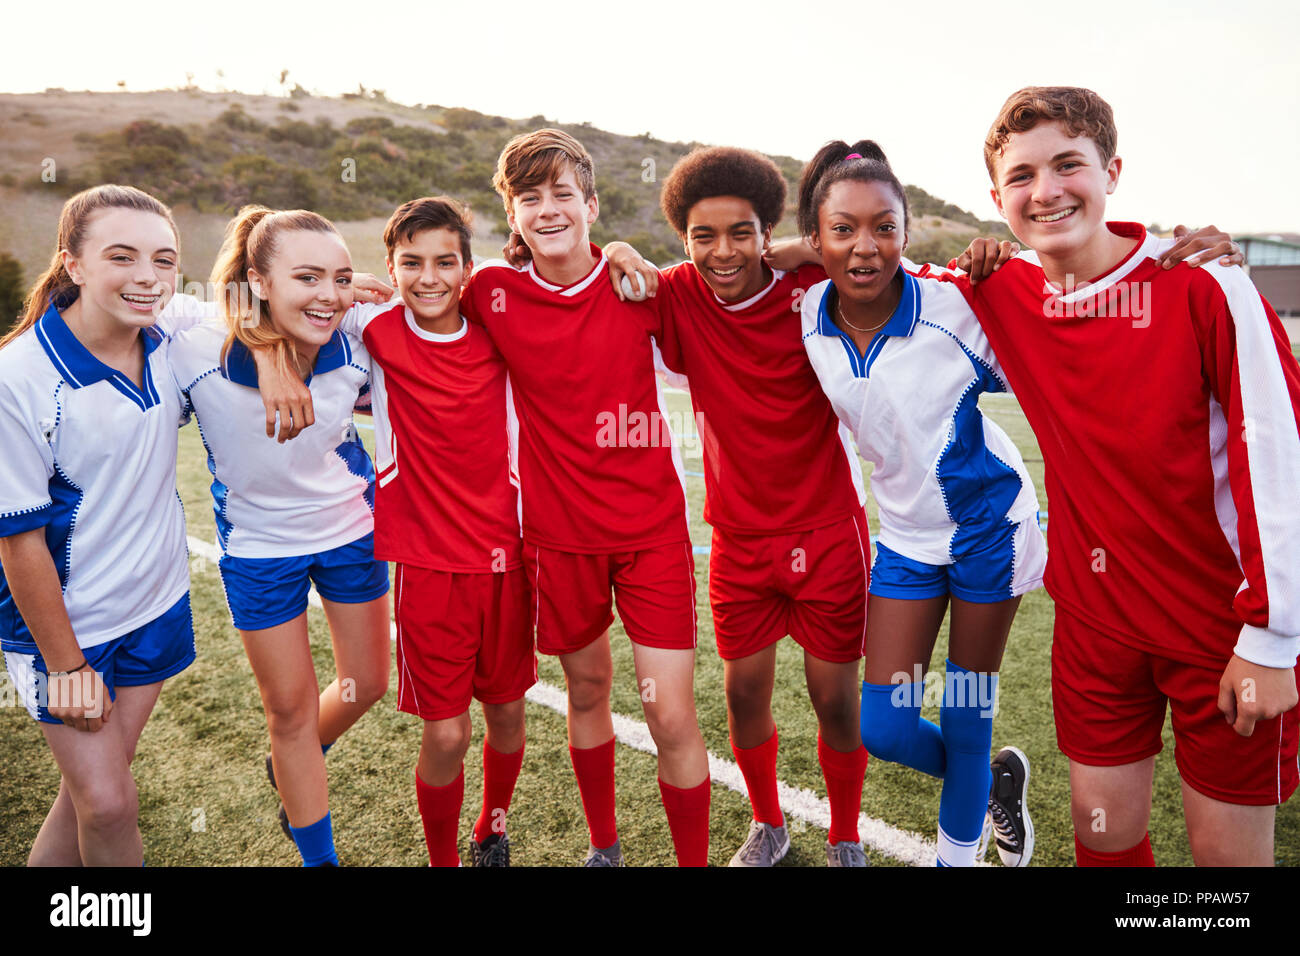 Portrait Of Male And Female High School Soccer Teams Stock Photo